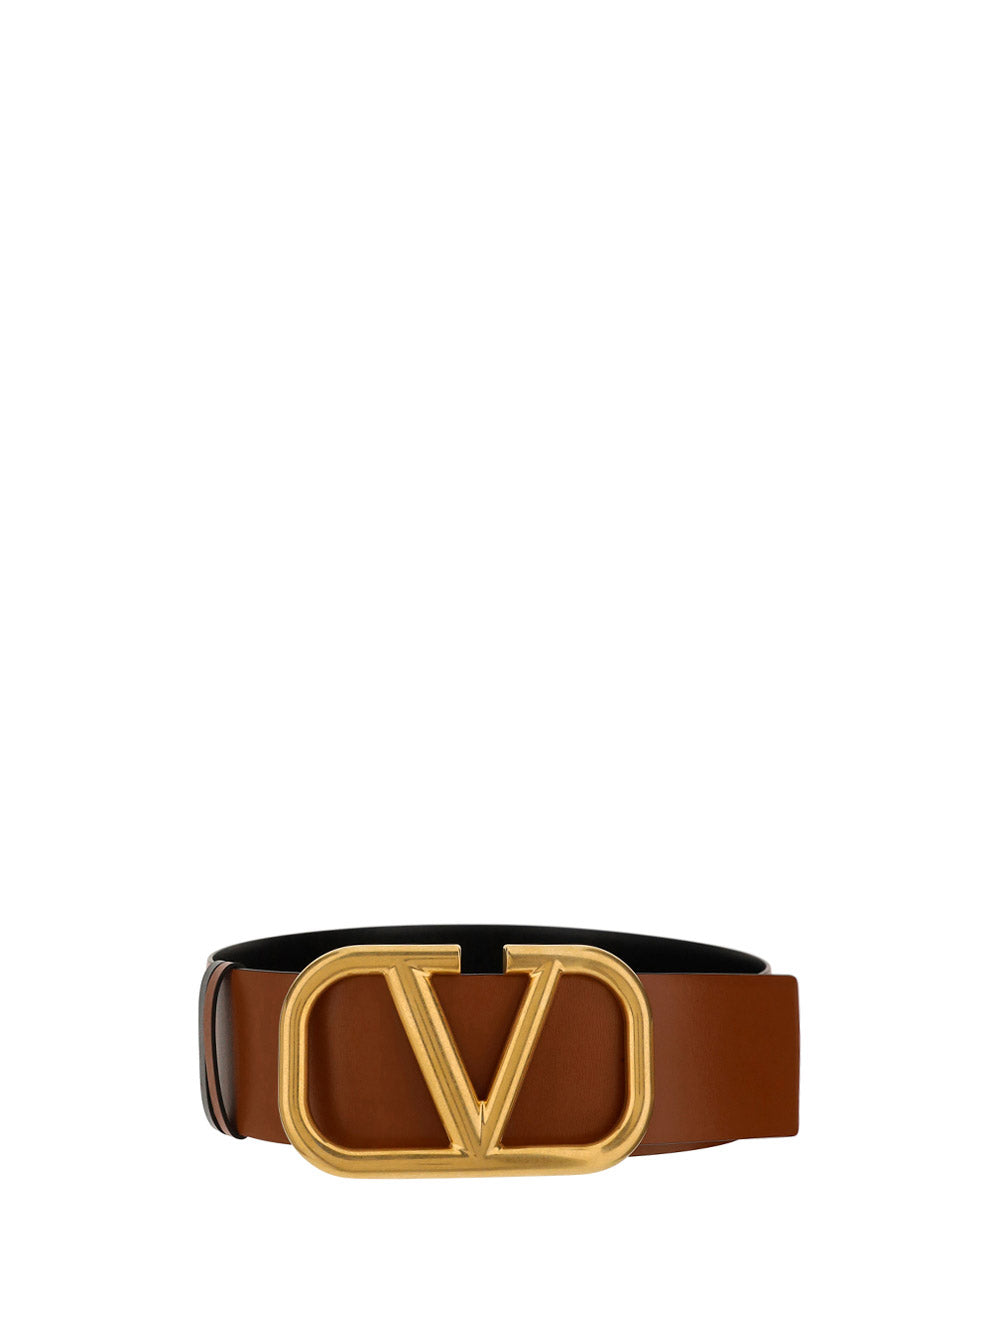 Reversible Vlogo Signature Belt In Glossy Calfskin 30 Mm by